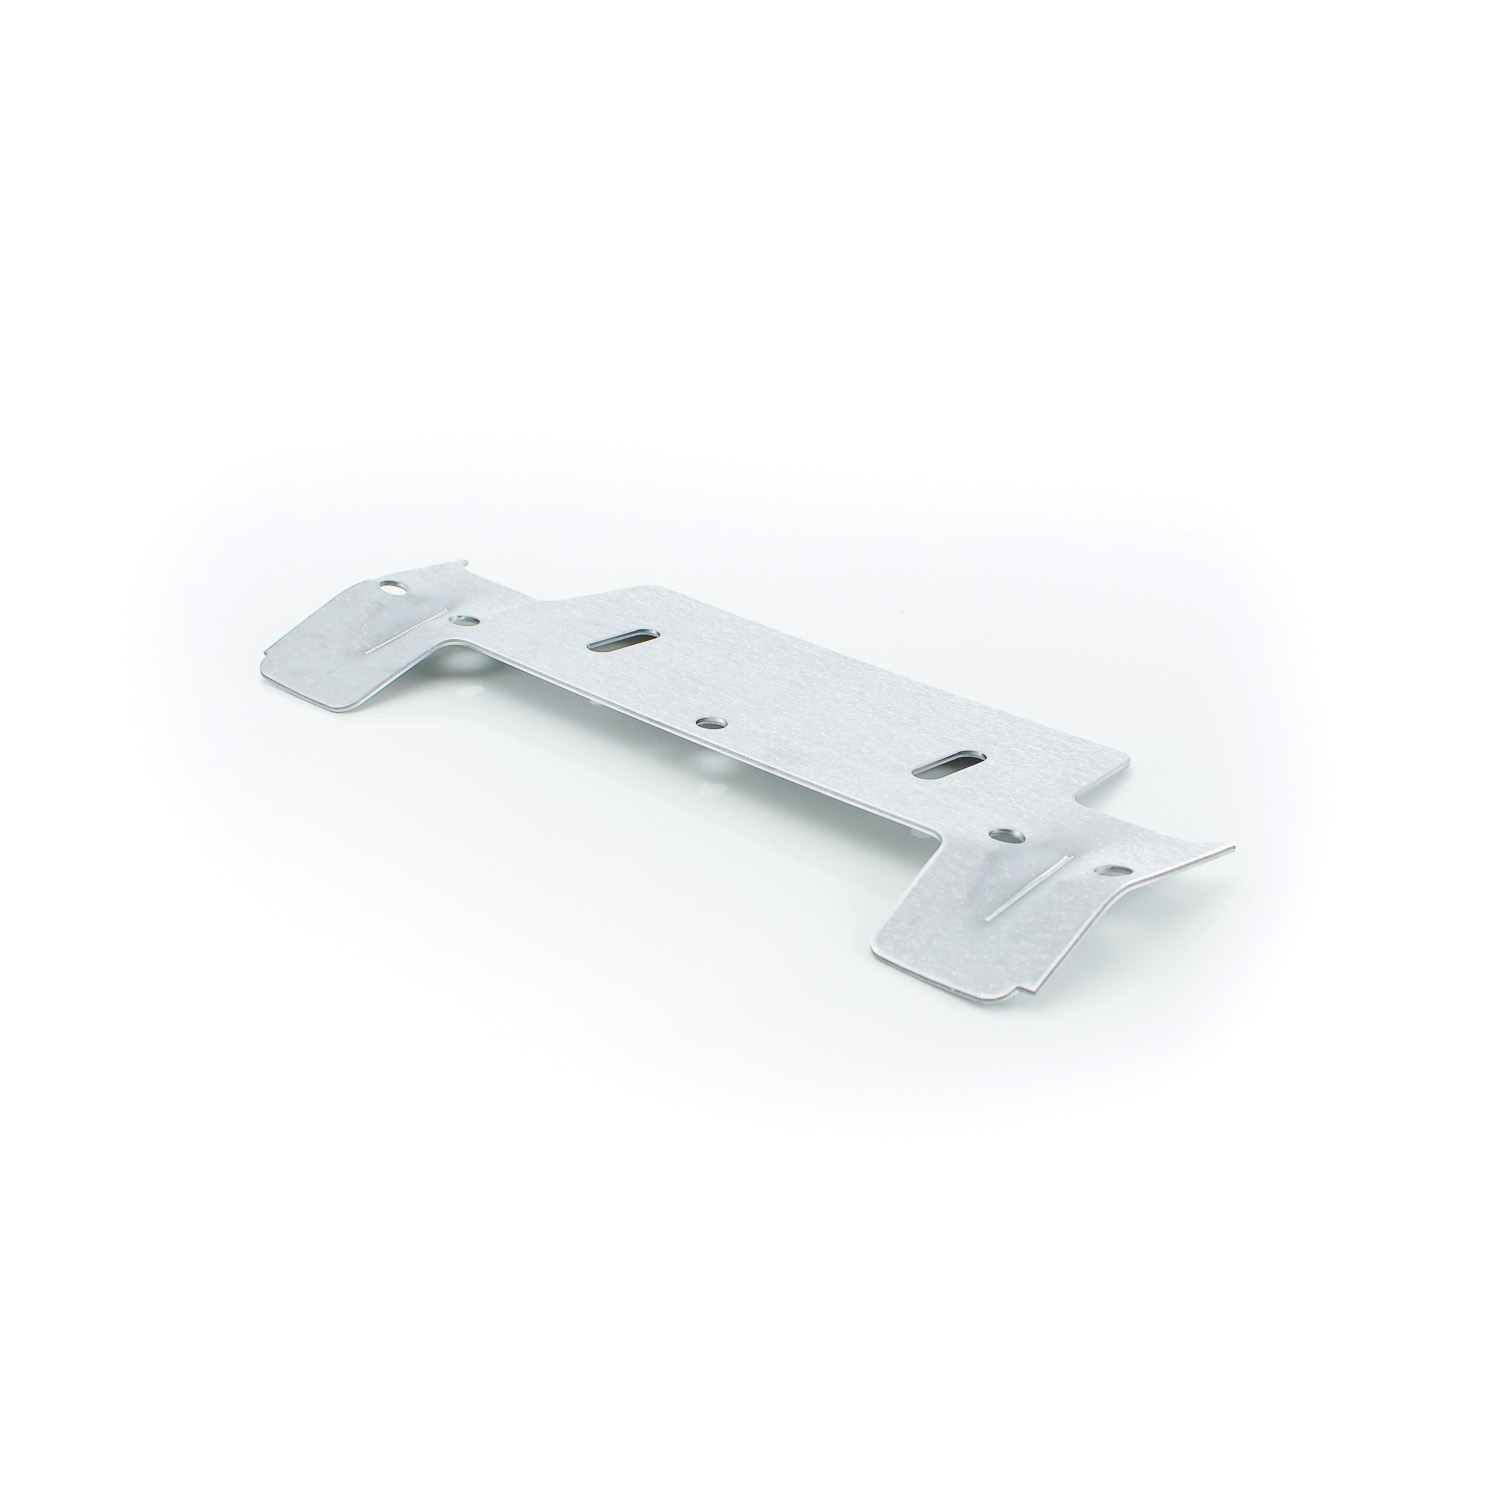 PASCO 1223 Lavatory Hanger, For Use With American Standard Lavatory Sink, Stamped Steel, Domestic